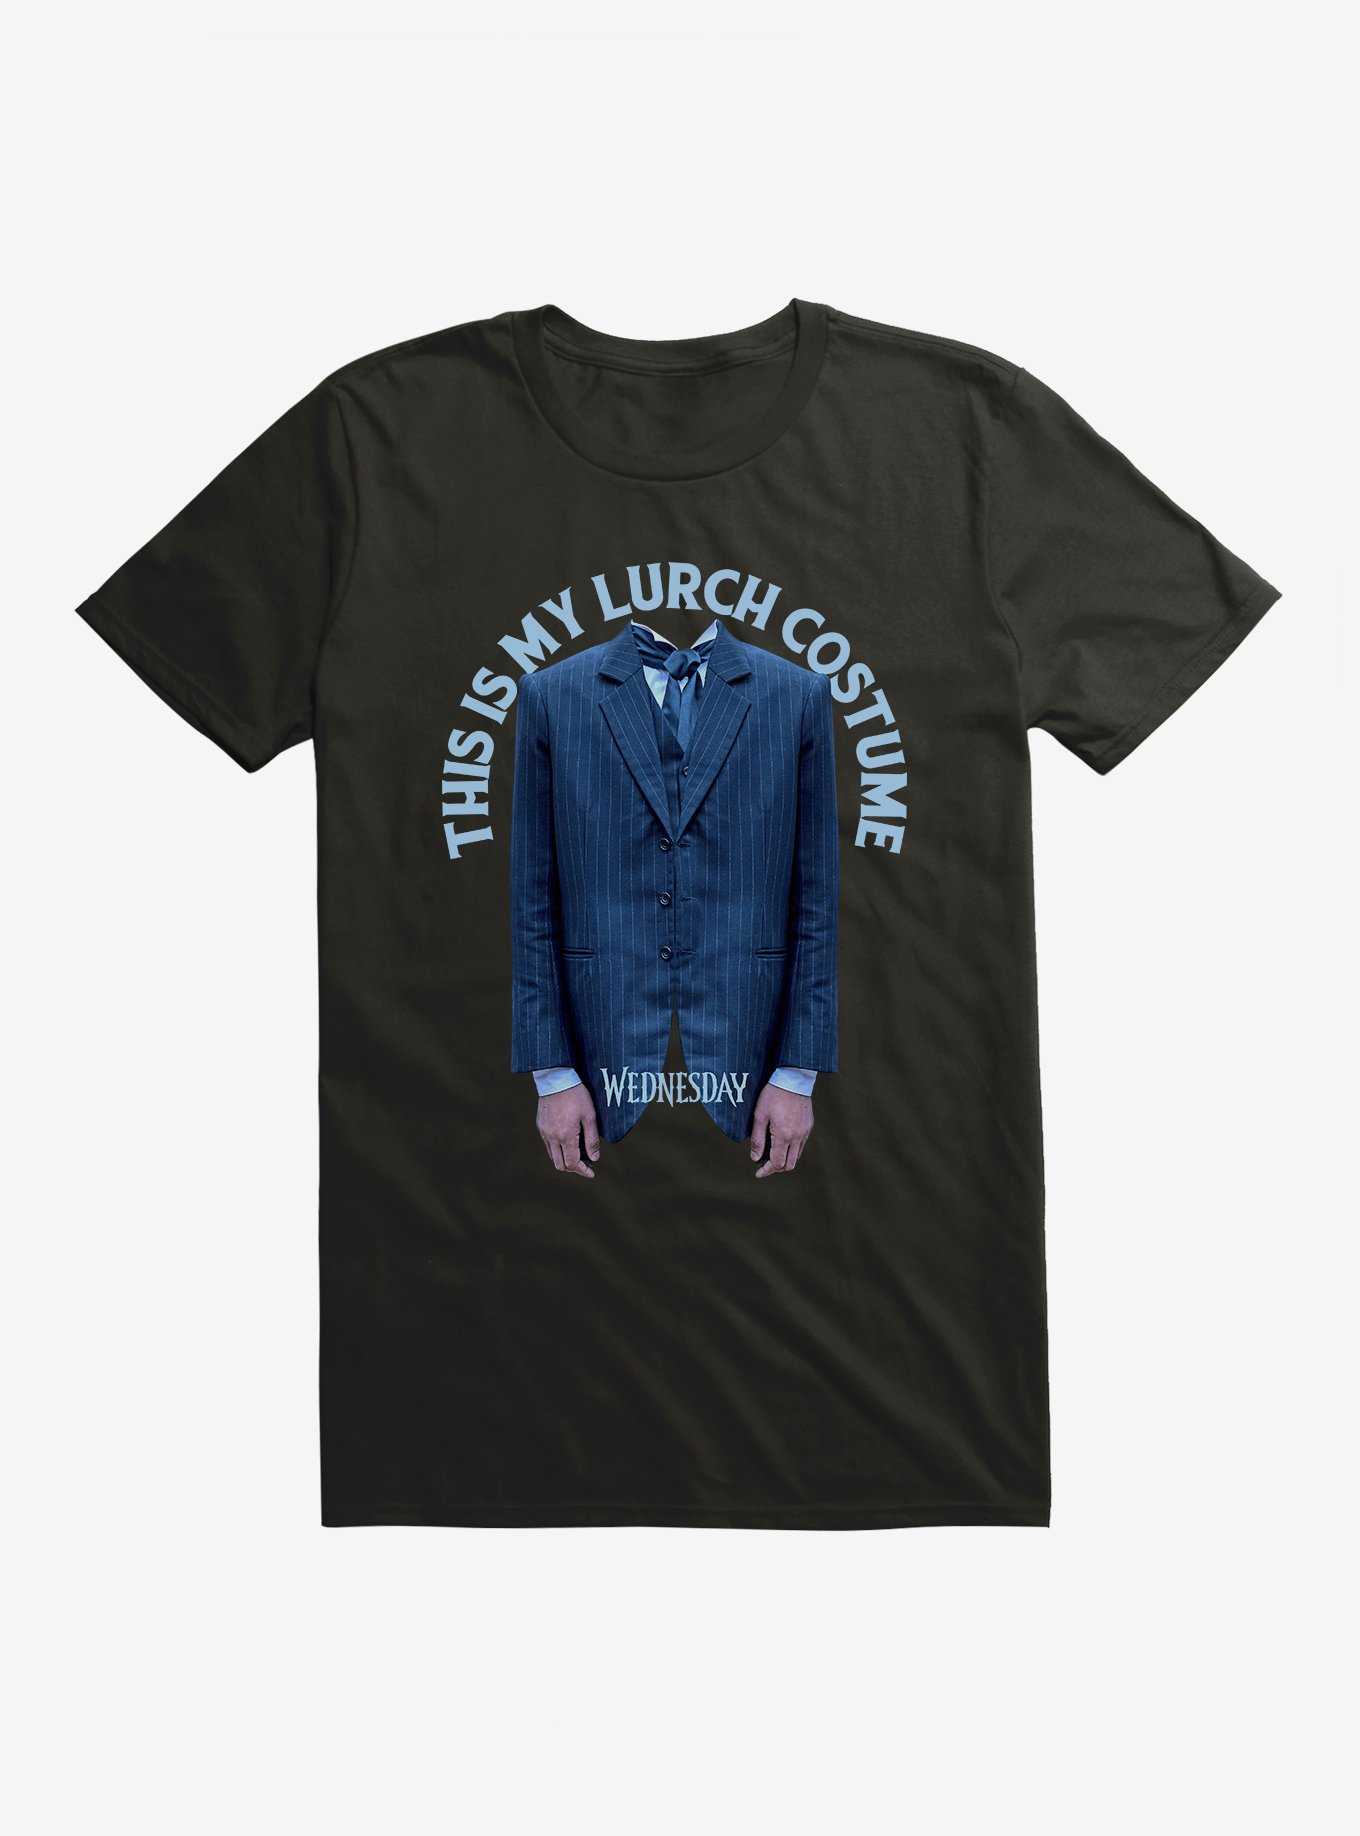 Wednesday This Is My Lurch Costume T-Shirt, , hi-res